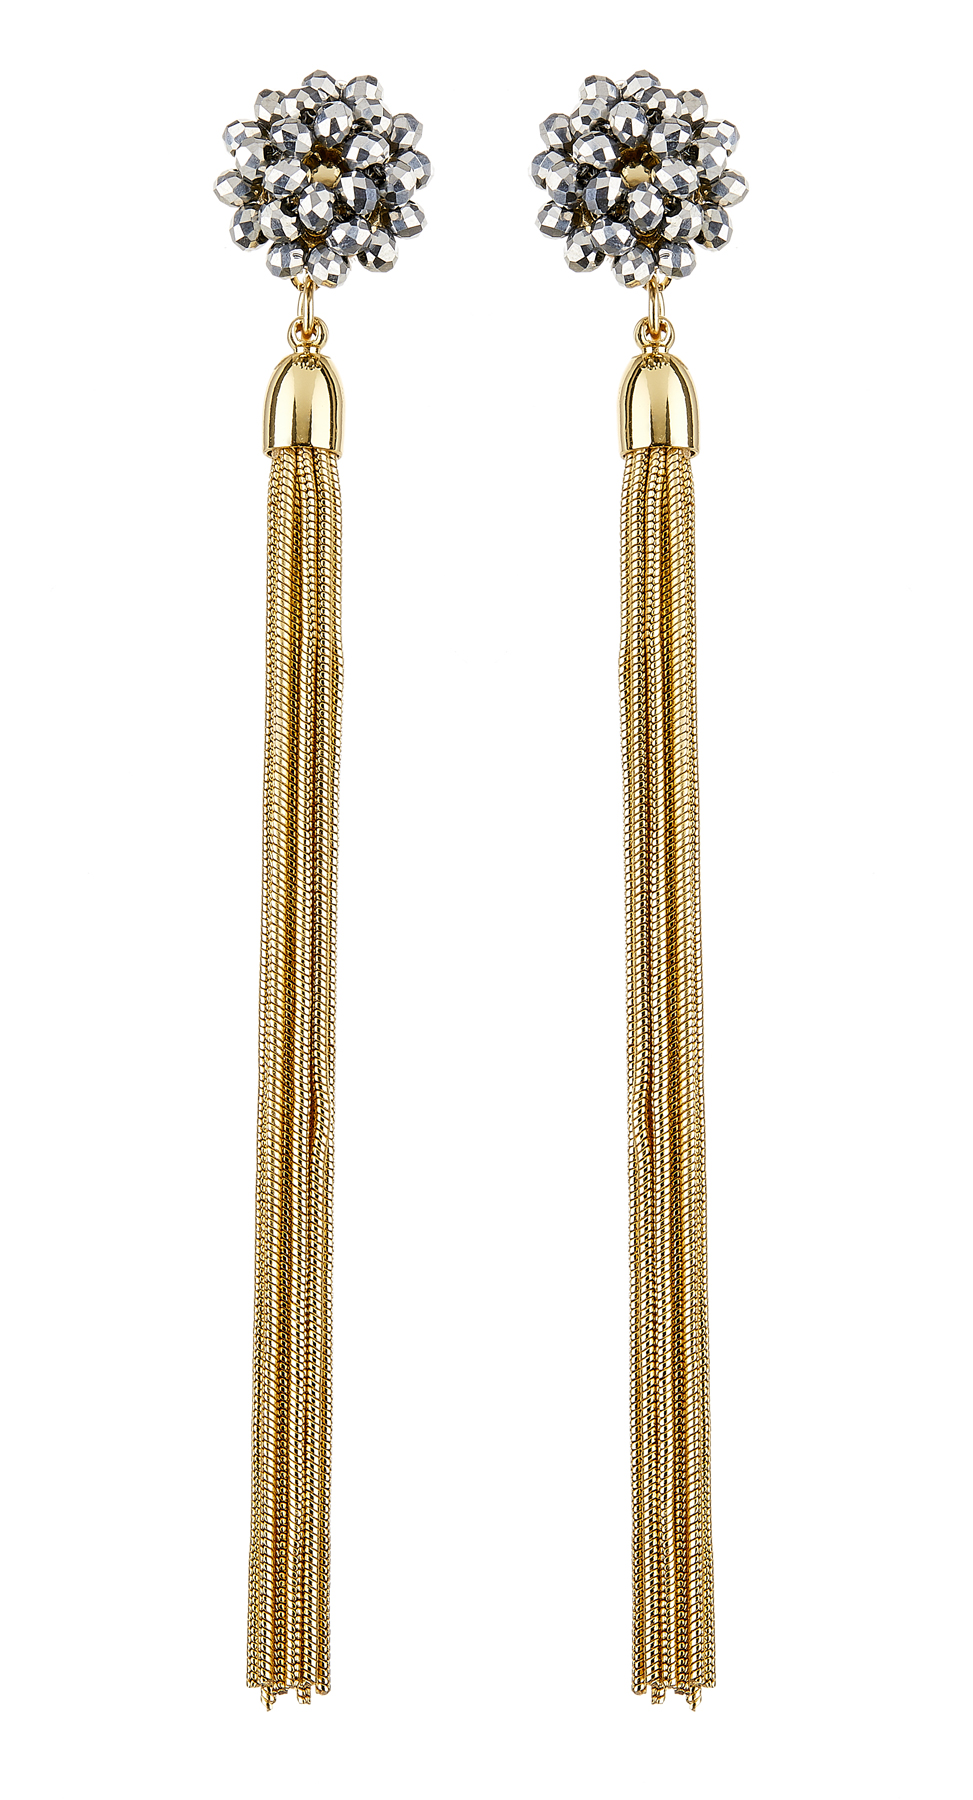 Clip On Earrings - Ruhi G - gold dangle earring with grey crystals and gold tassels